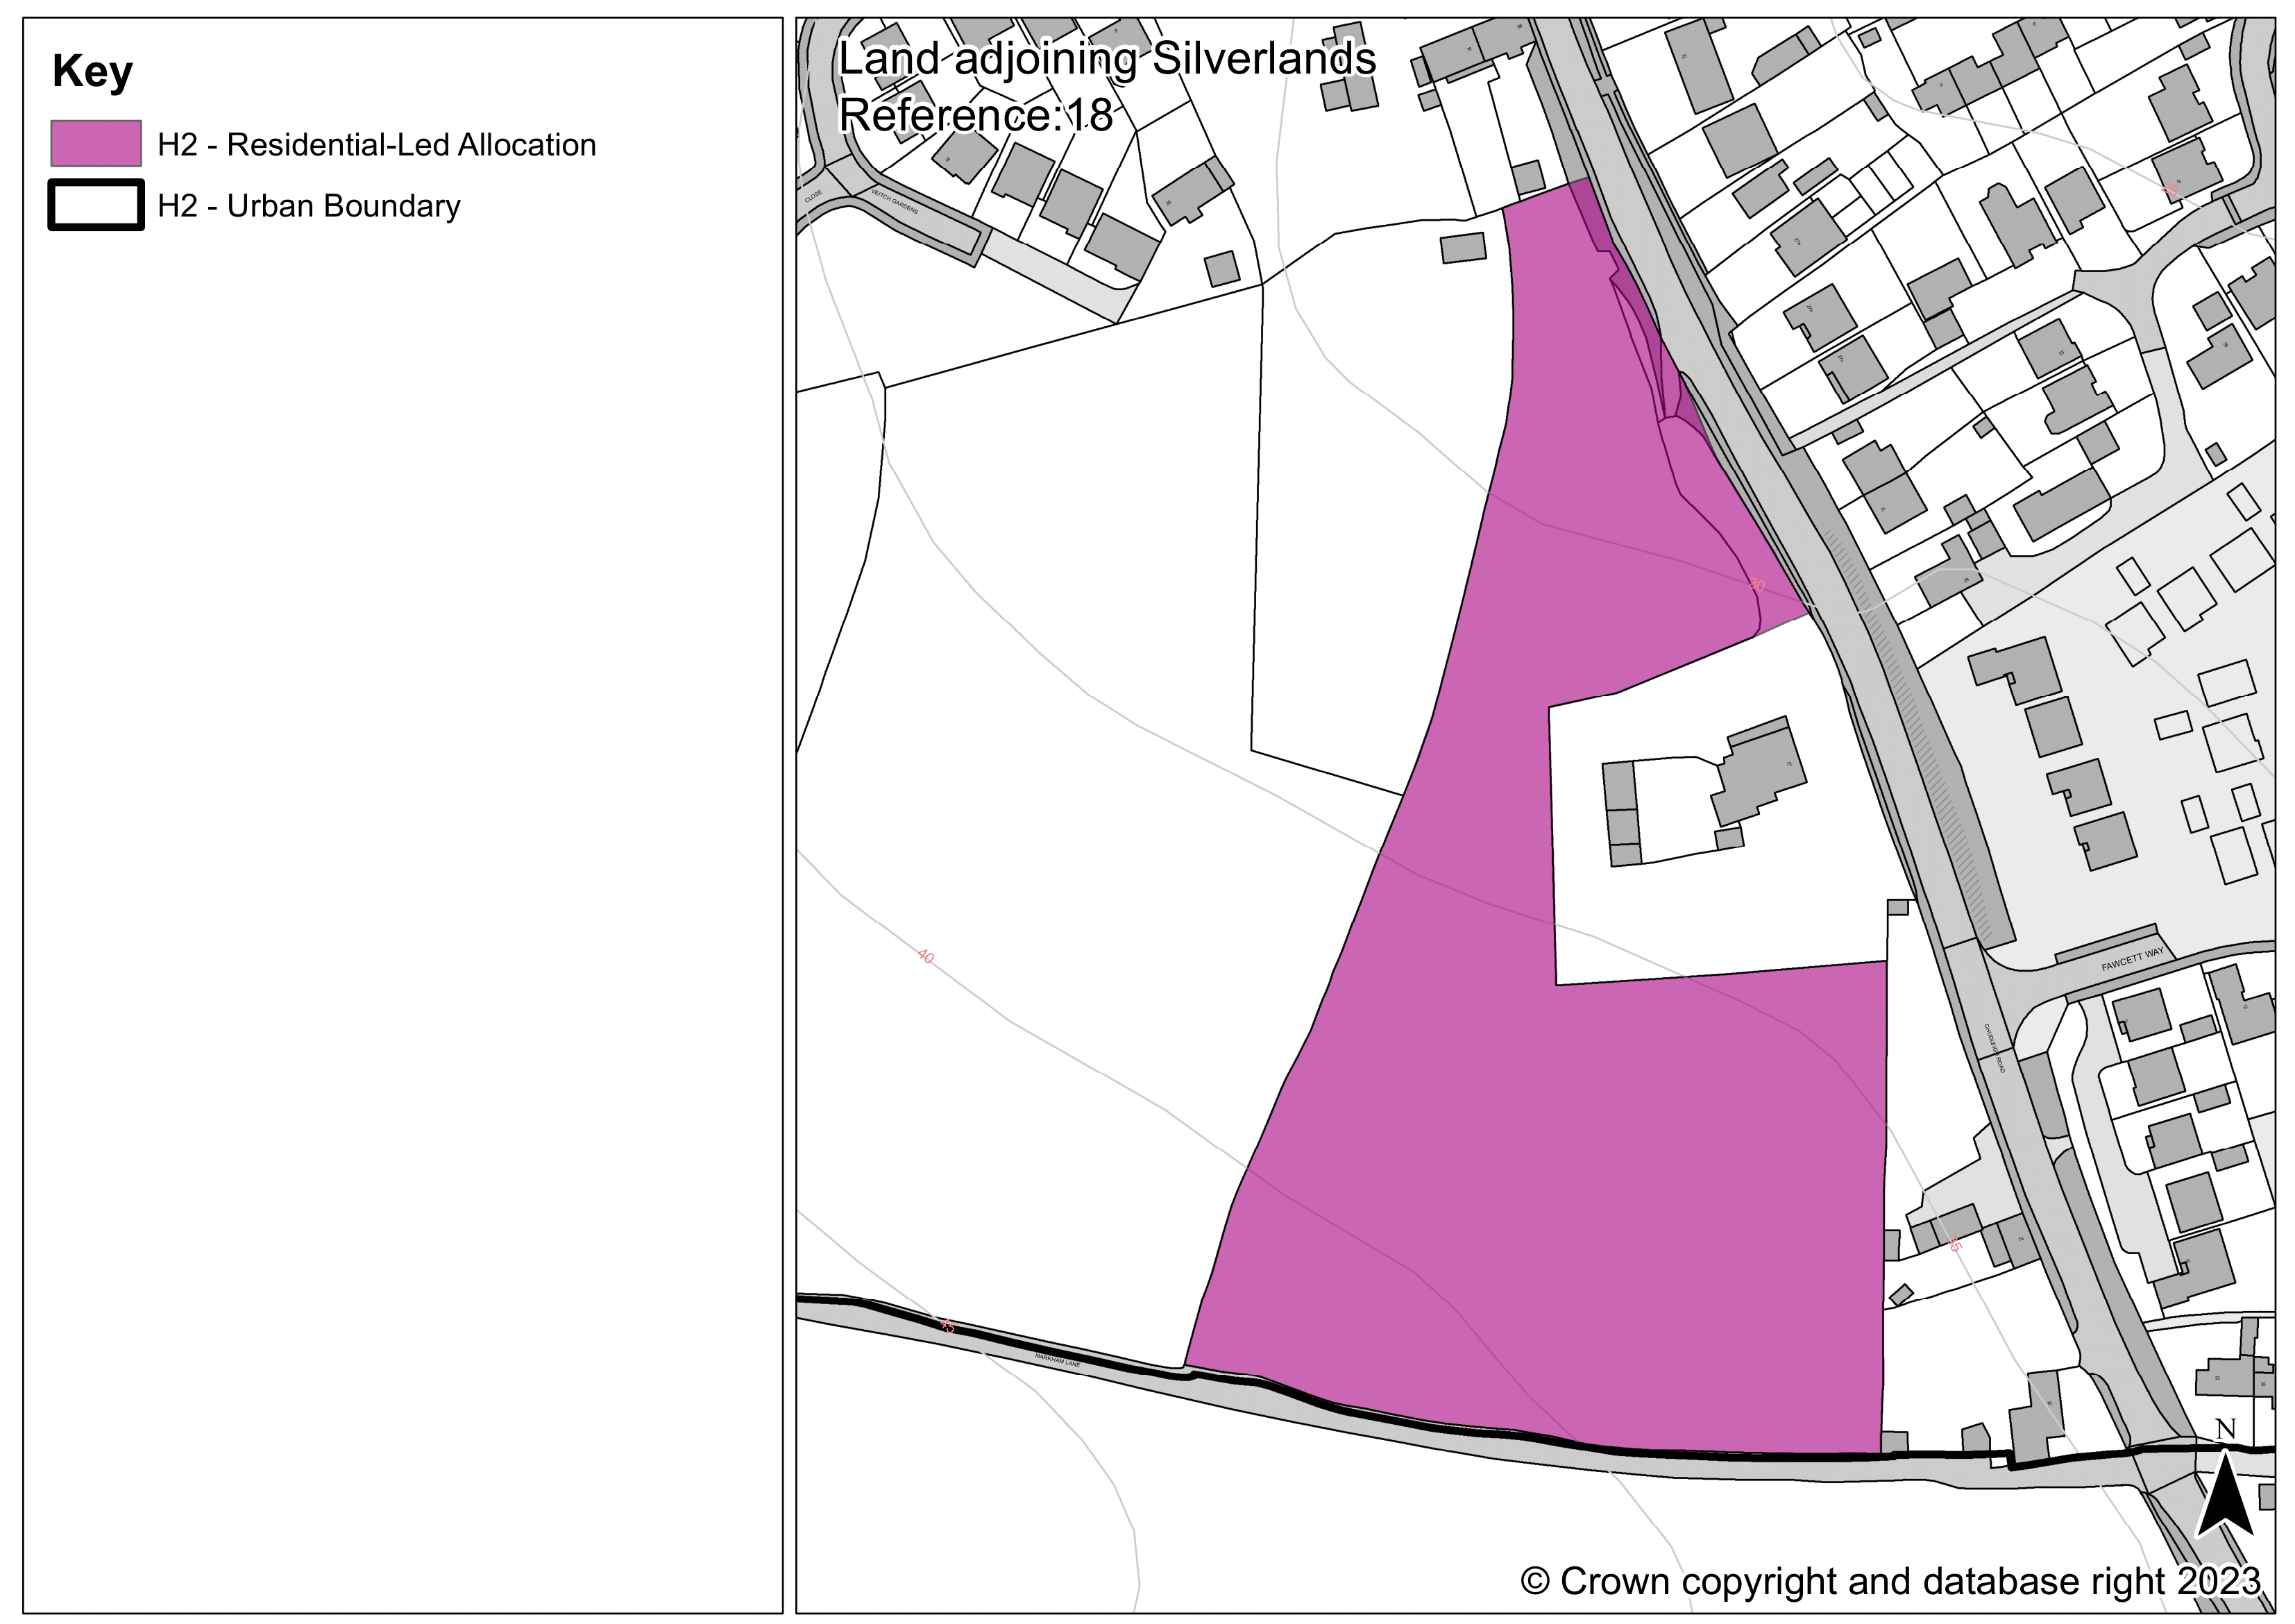 Map showing the land adjoining Silverlands